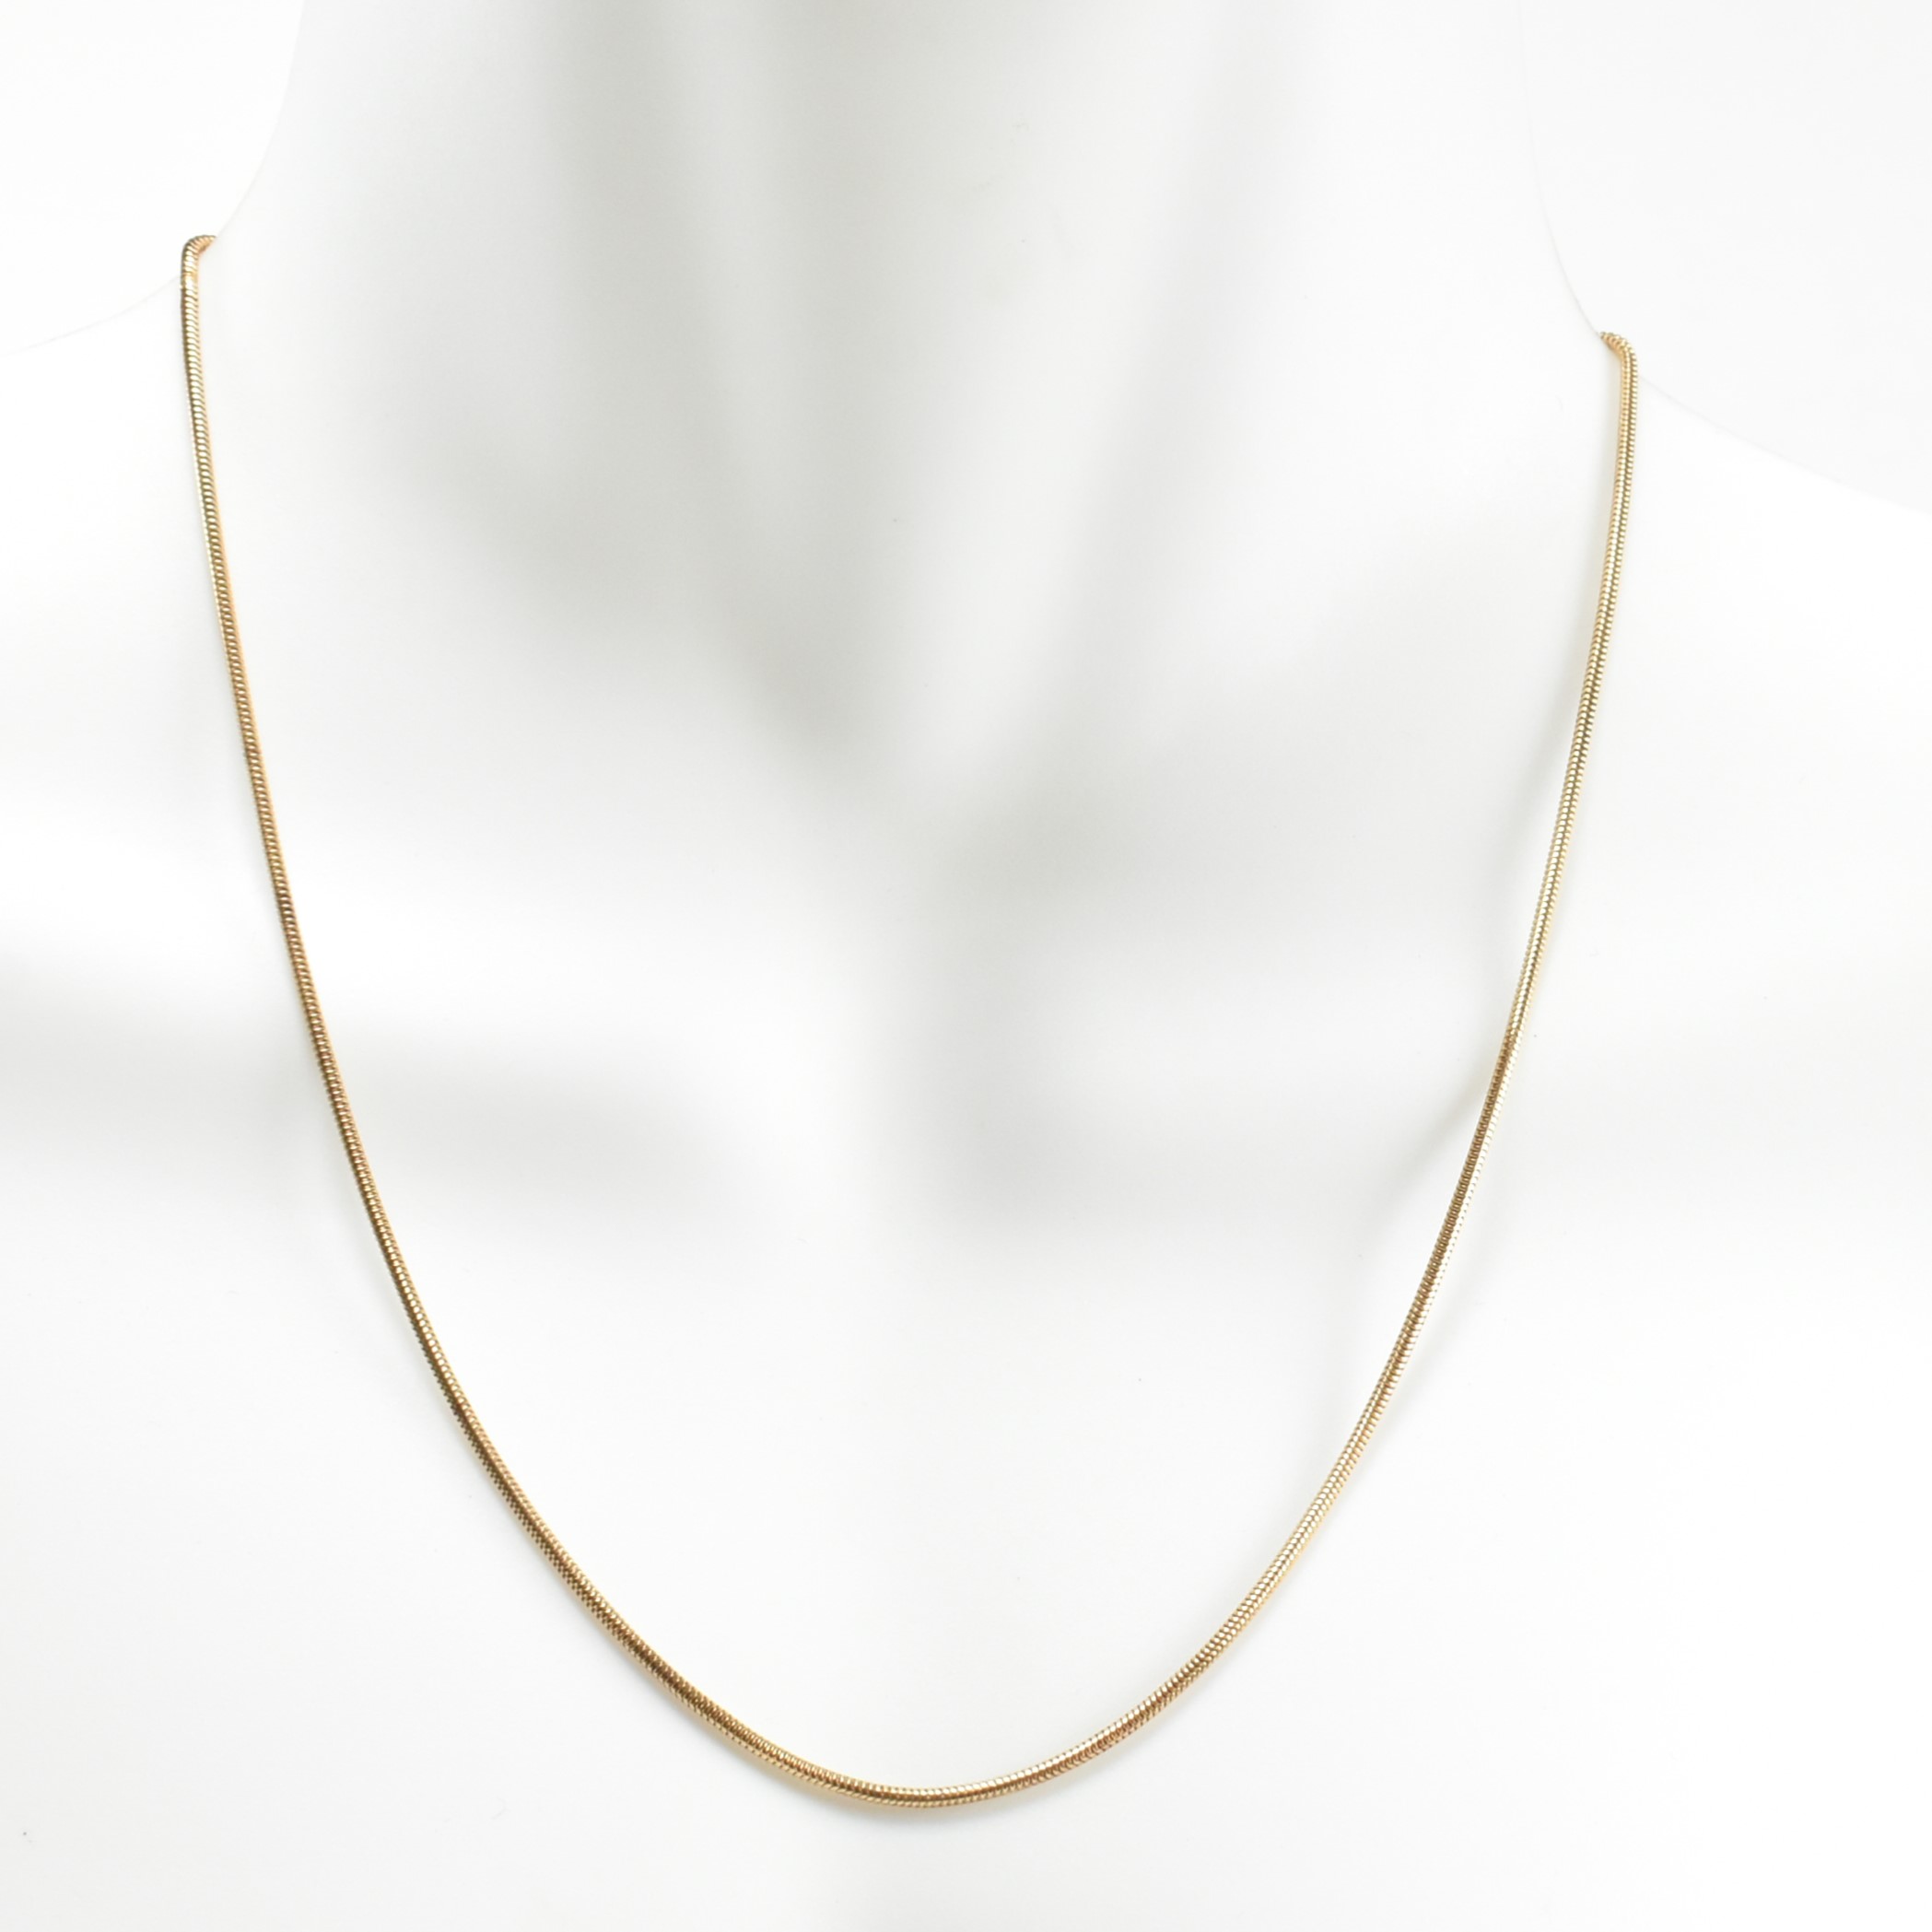 HALLMARKED 9CT GOLD SNAKE CHAIN NECKLACE - Image 4 of 4